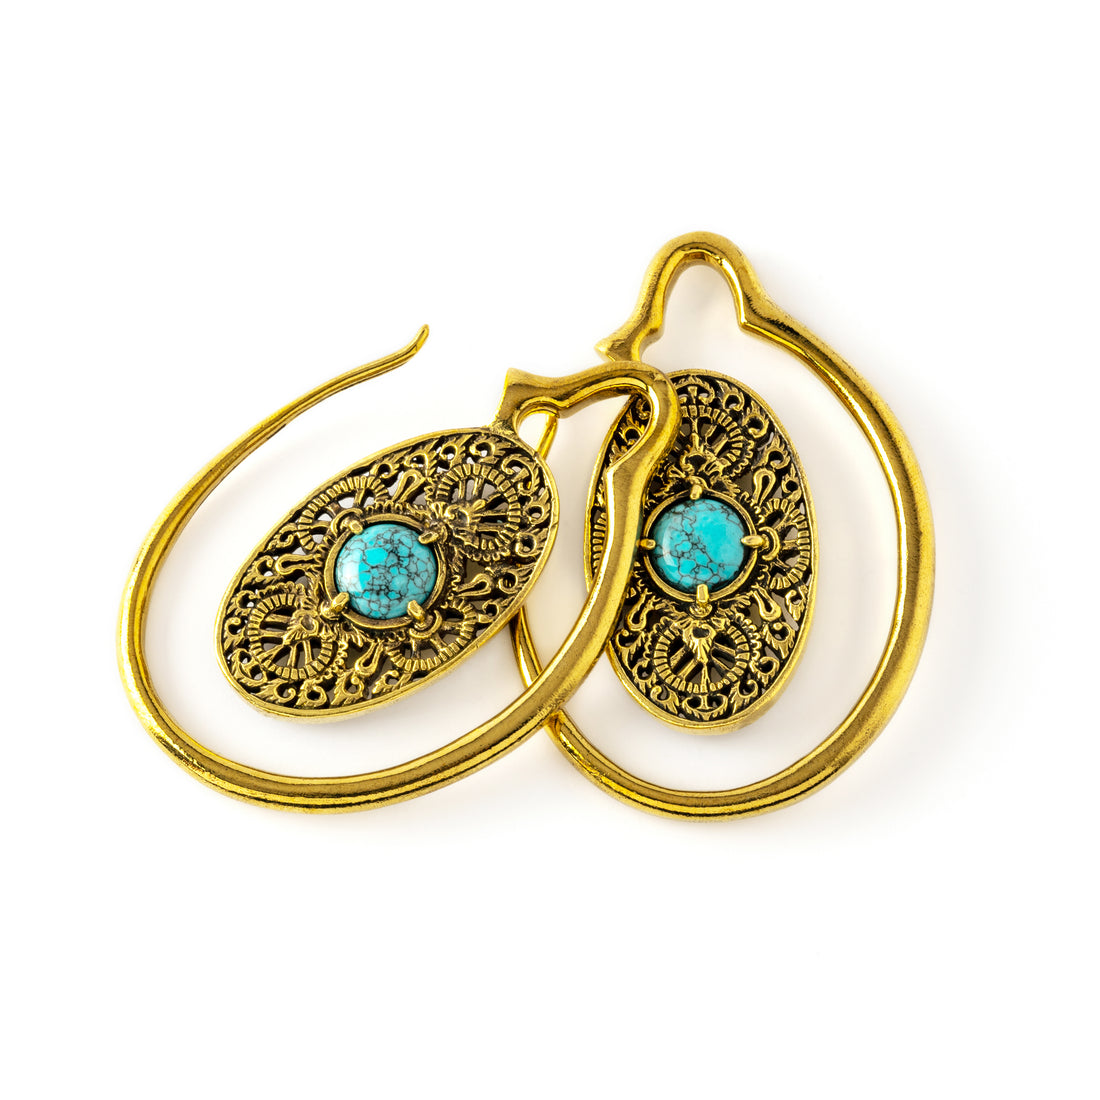 pair of golden large ear weights hangers oval shaped with intricate filigree pattern and turquoise